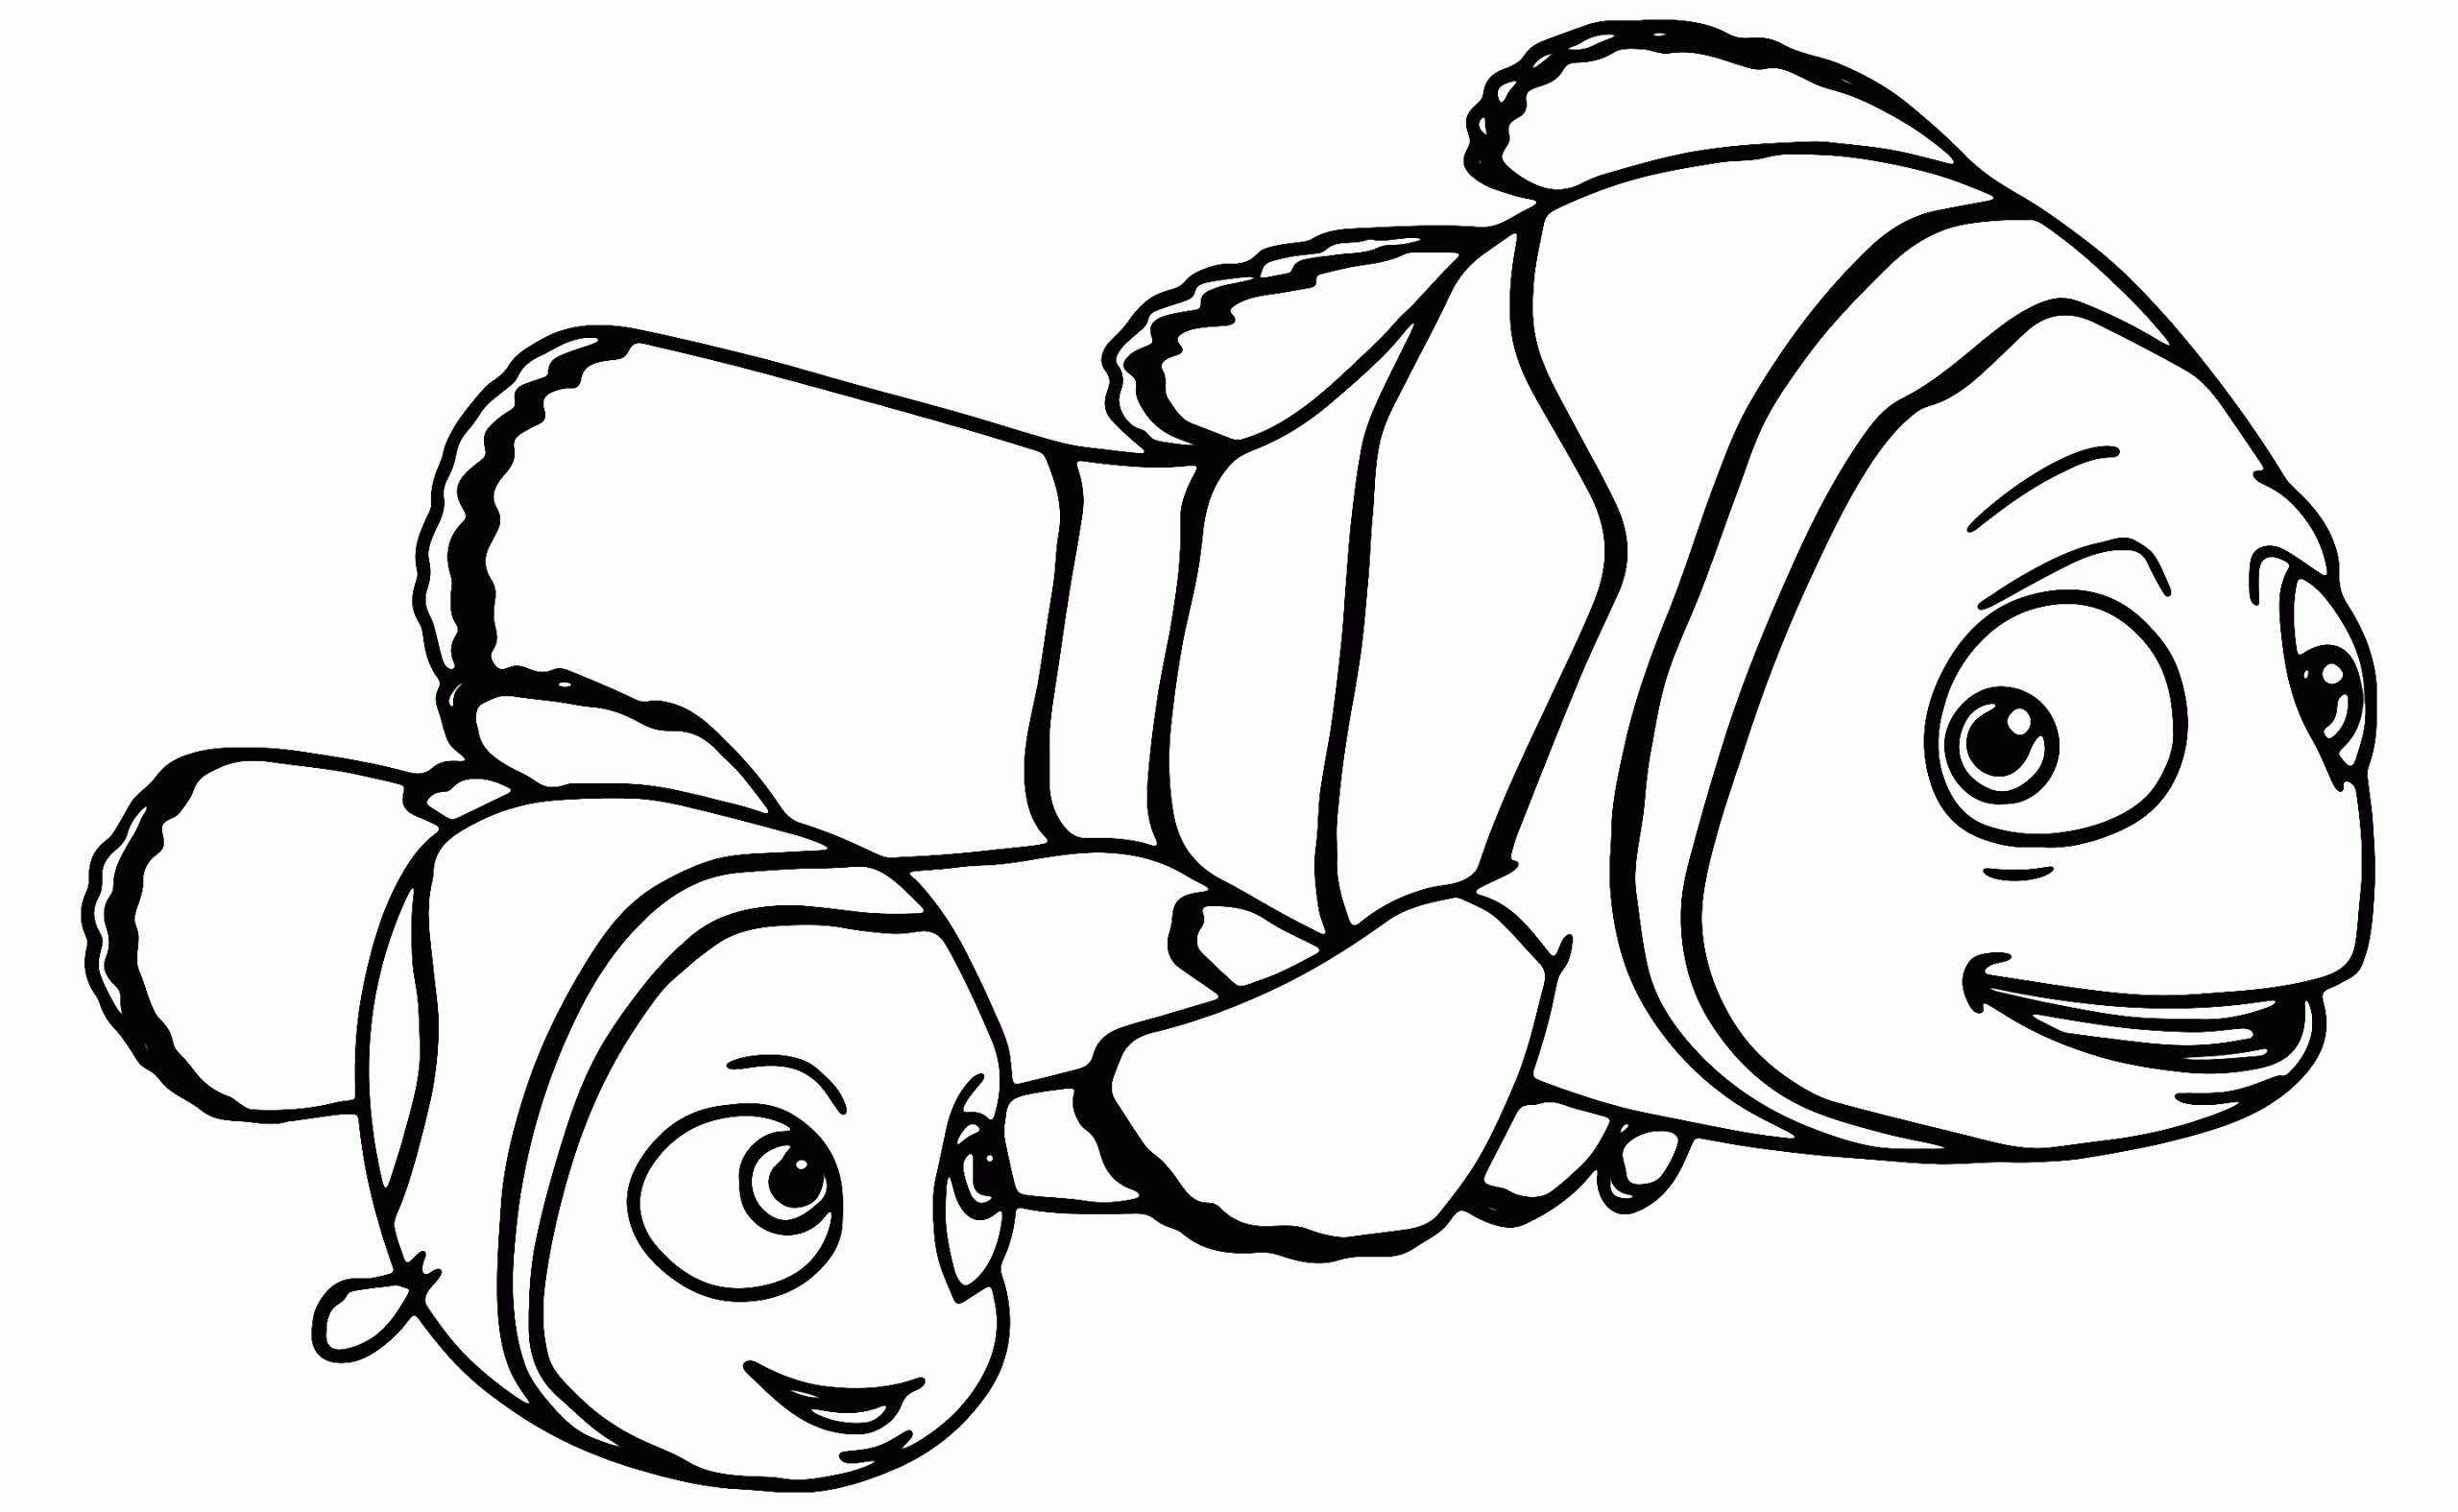 Marlin Clownfish and Nemo Coloring Page for Toddlers